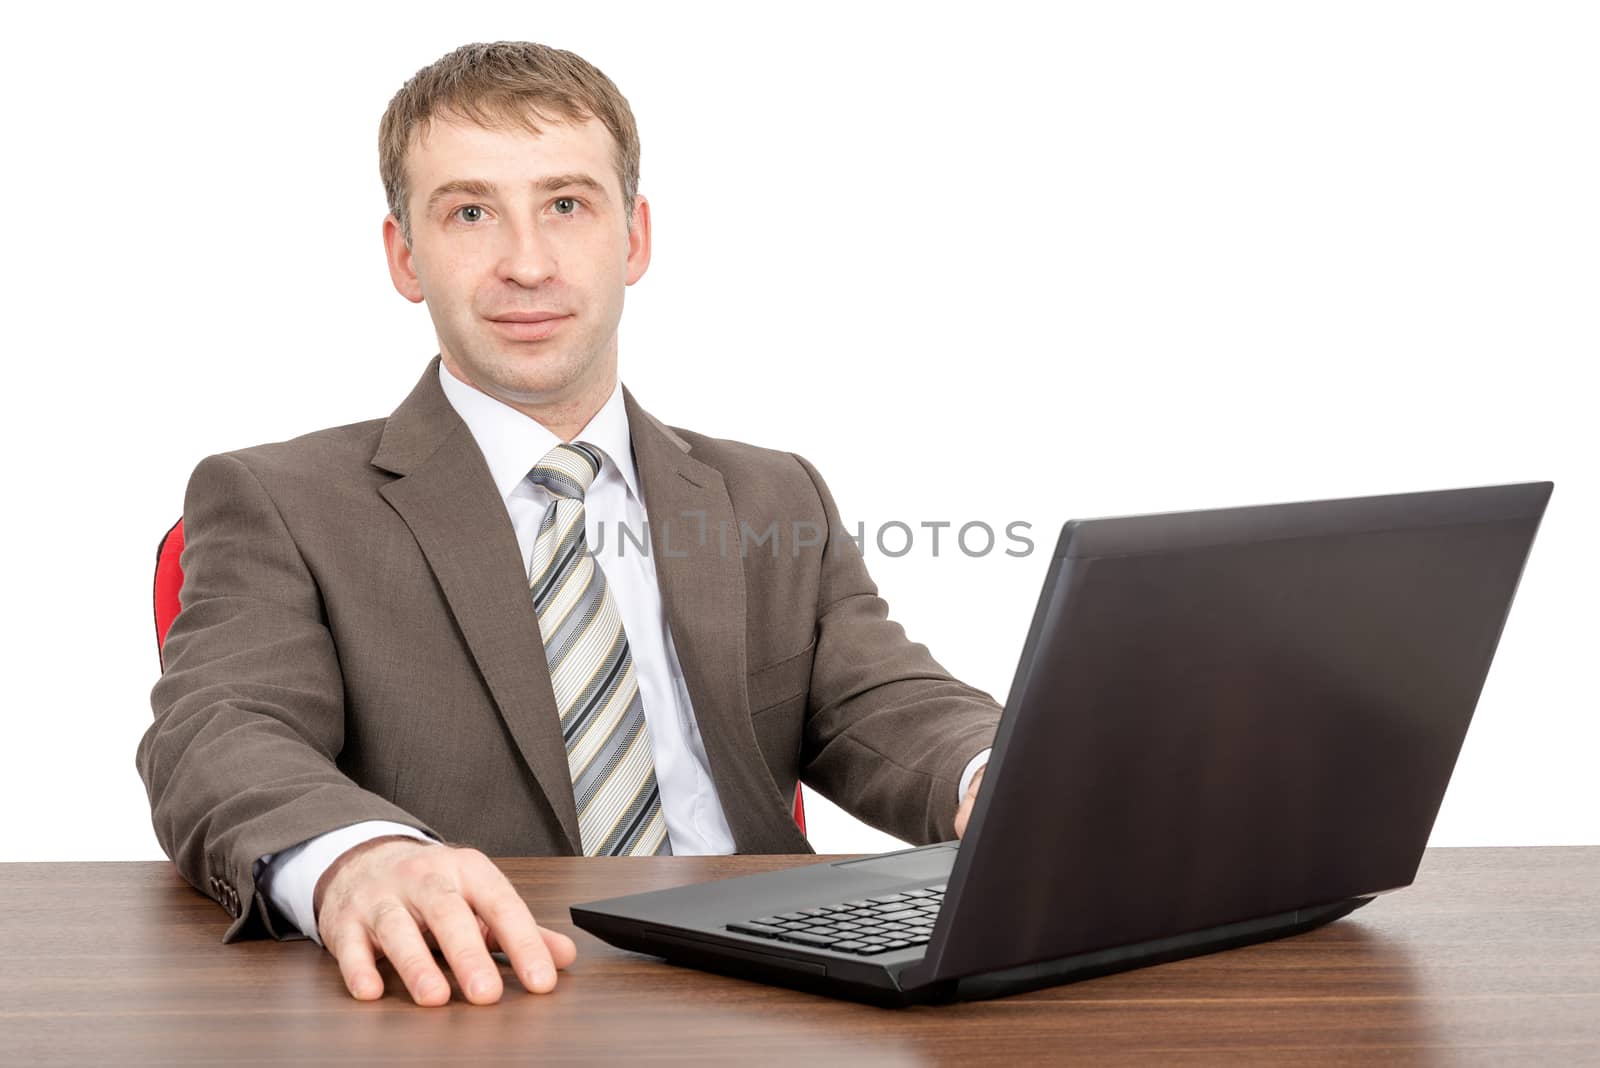 Businessman working on laptop and looking at camera isolated on white background, front view